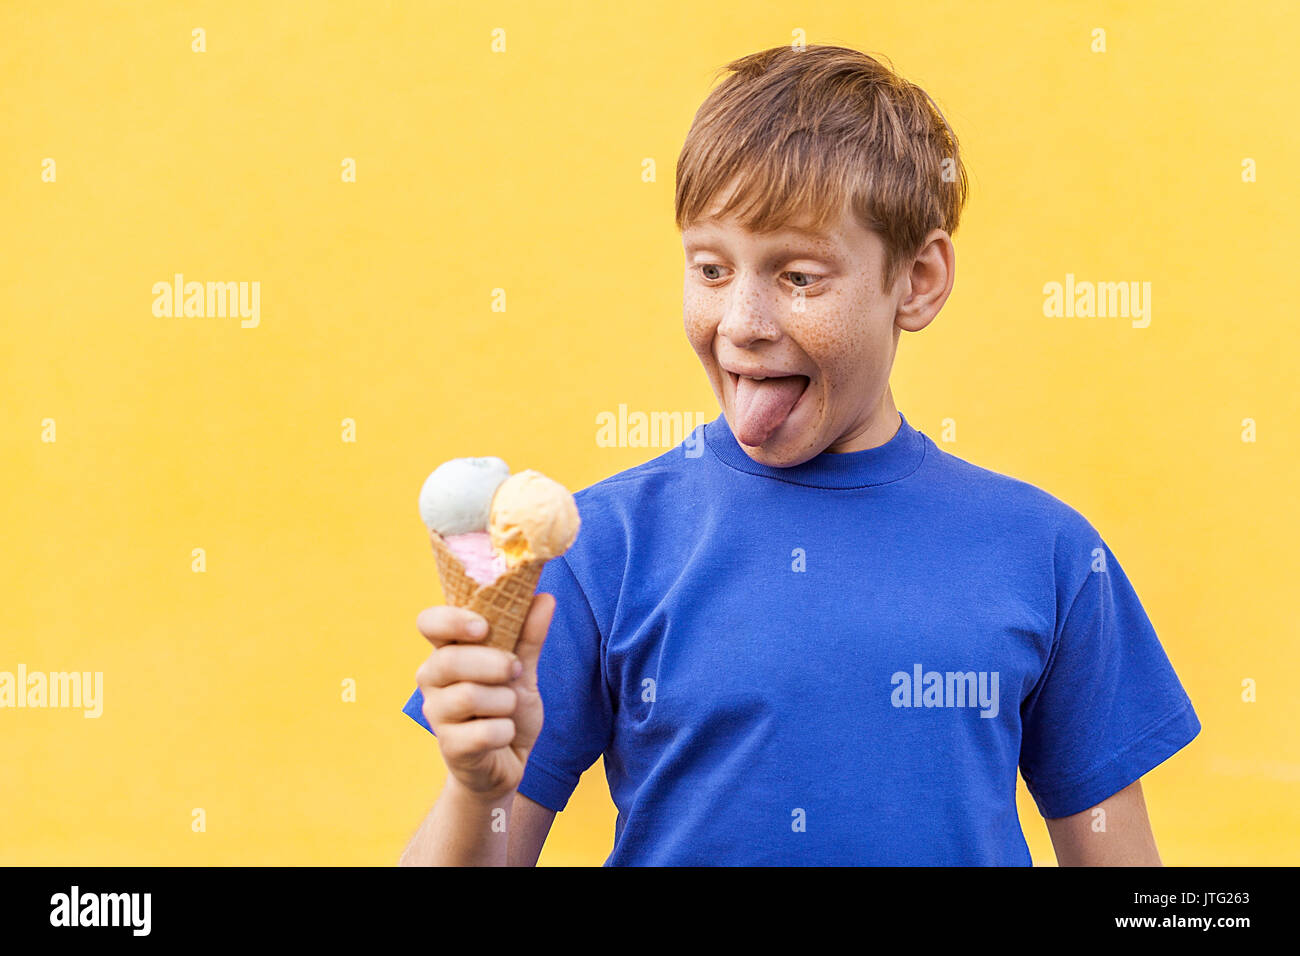 The blondå beautiful boy with freckles and blue t-shirt looking at  ice cream  with surprised face and tongue out. Studio shot, isolated on a yellow b Stock Photo